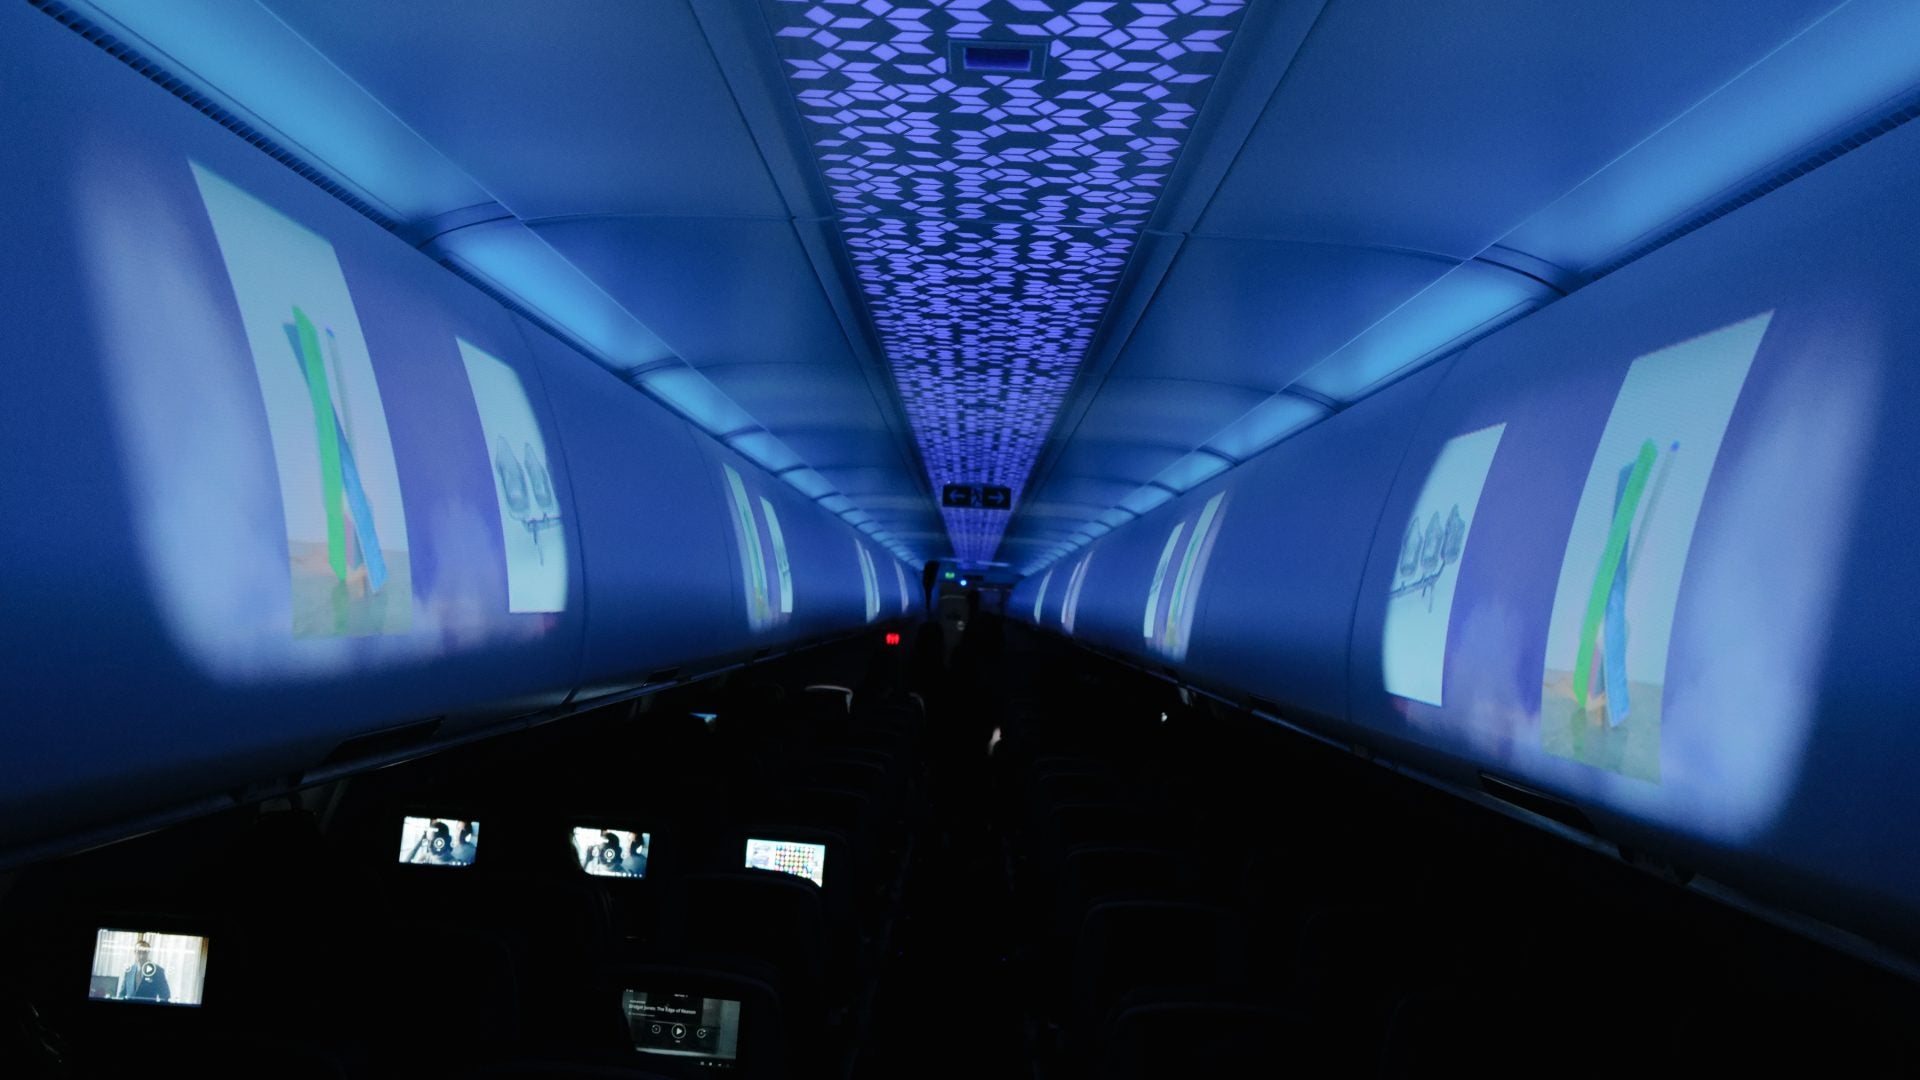 Delta Turned A Plane Into An Immersive Art Gallery For Art Basel And We Were On It